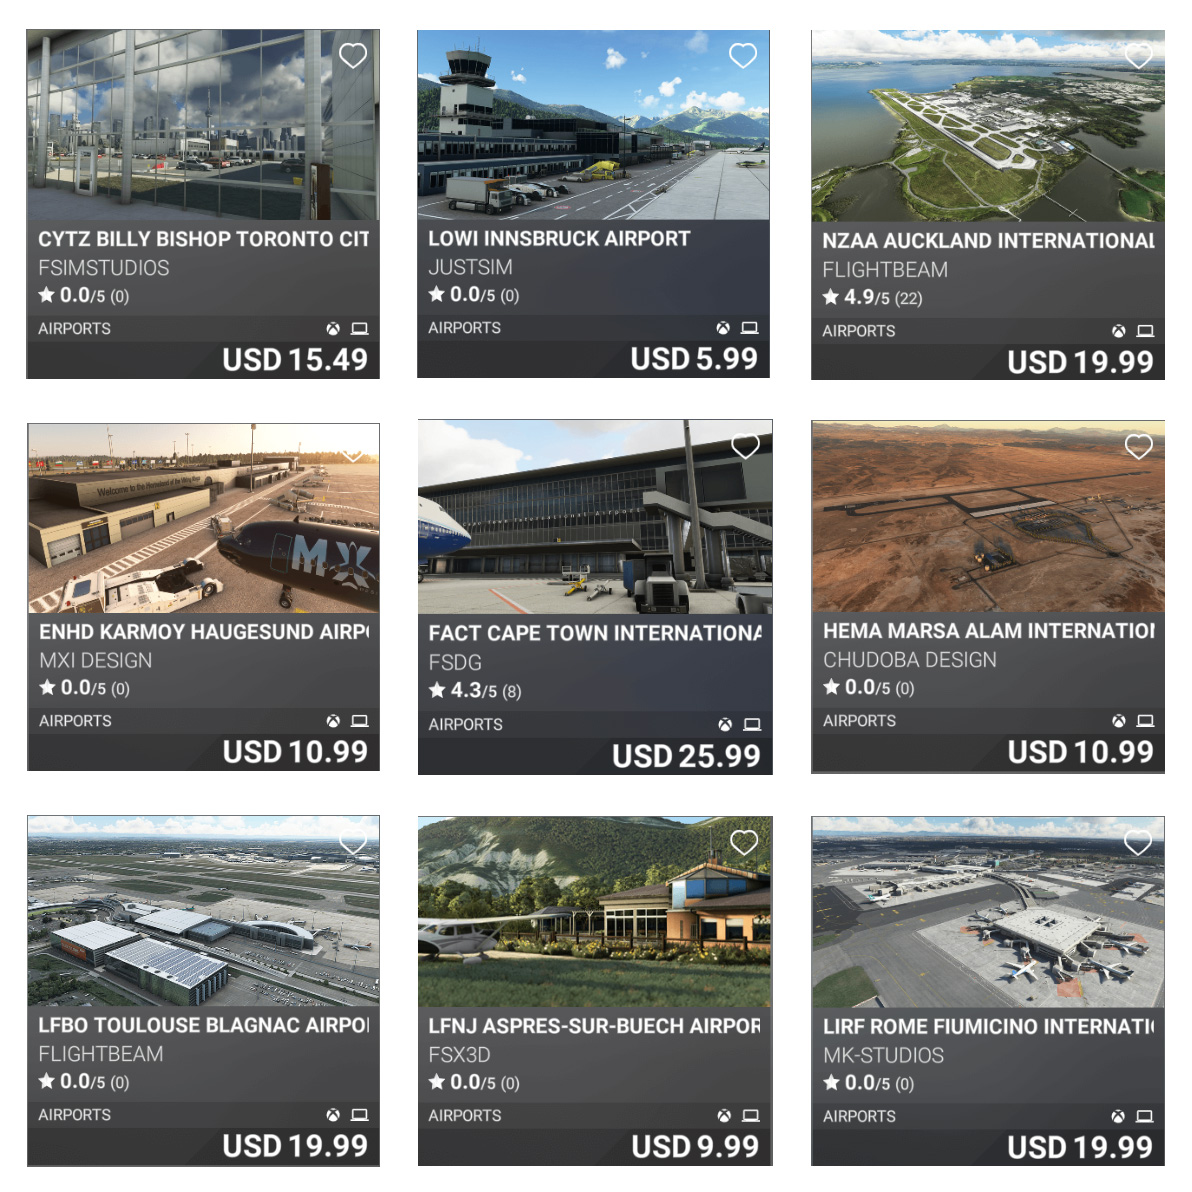 msfs marketplace new airports may 12